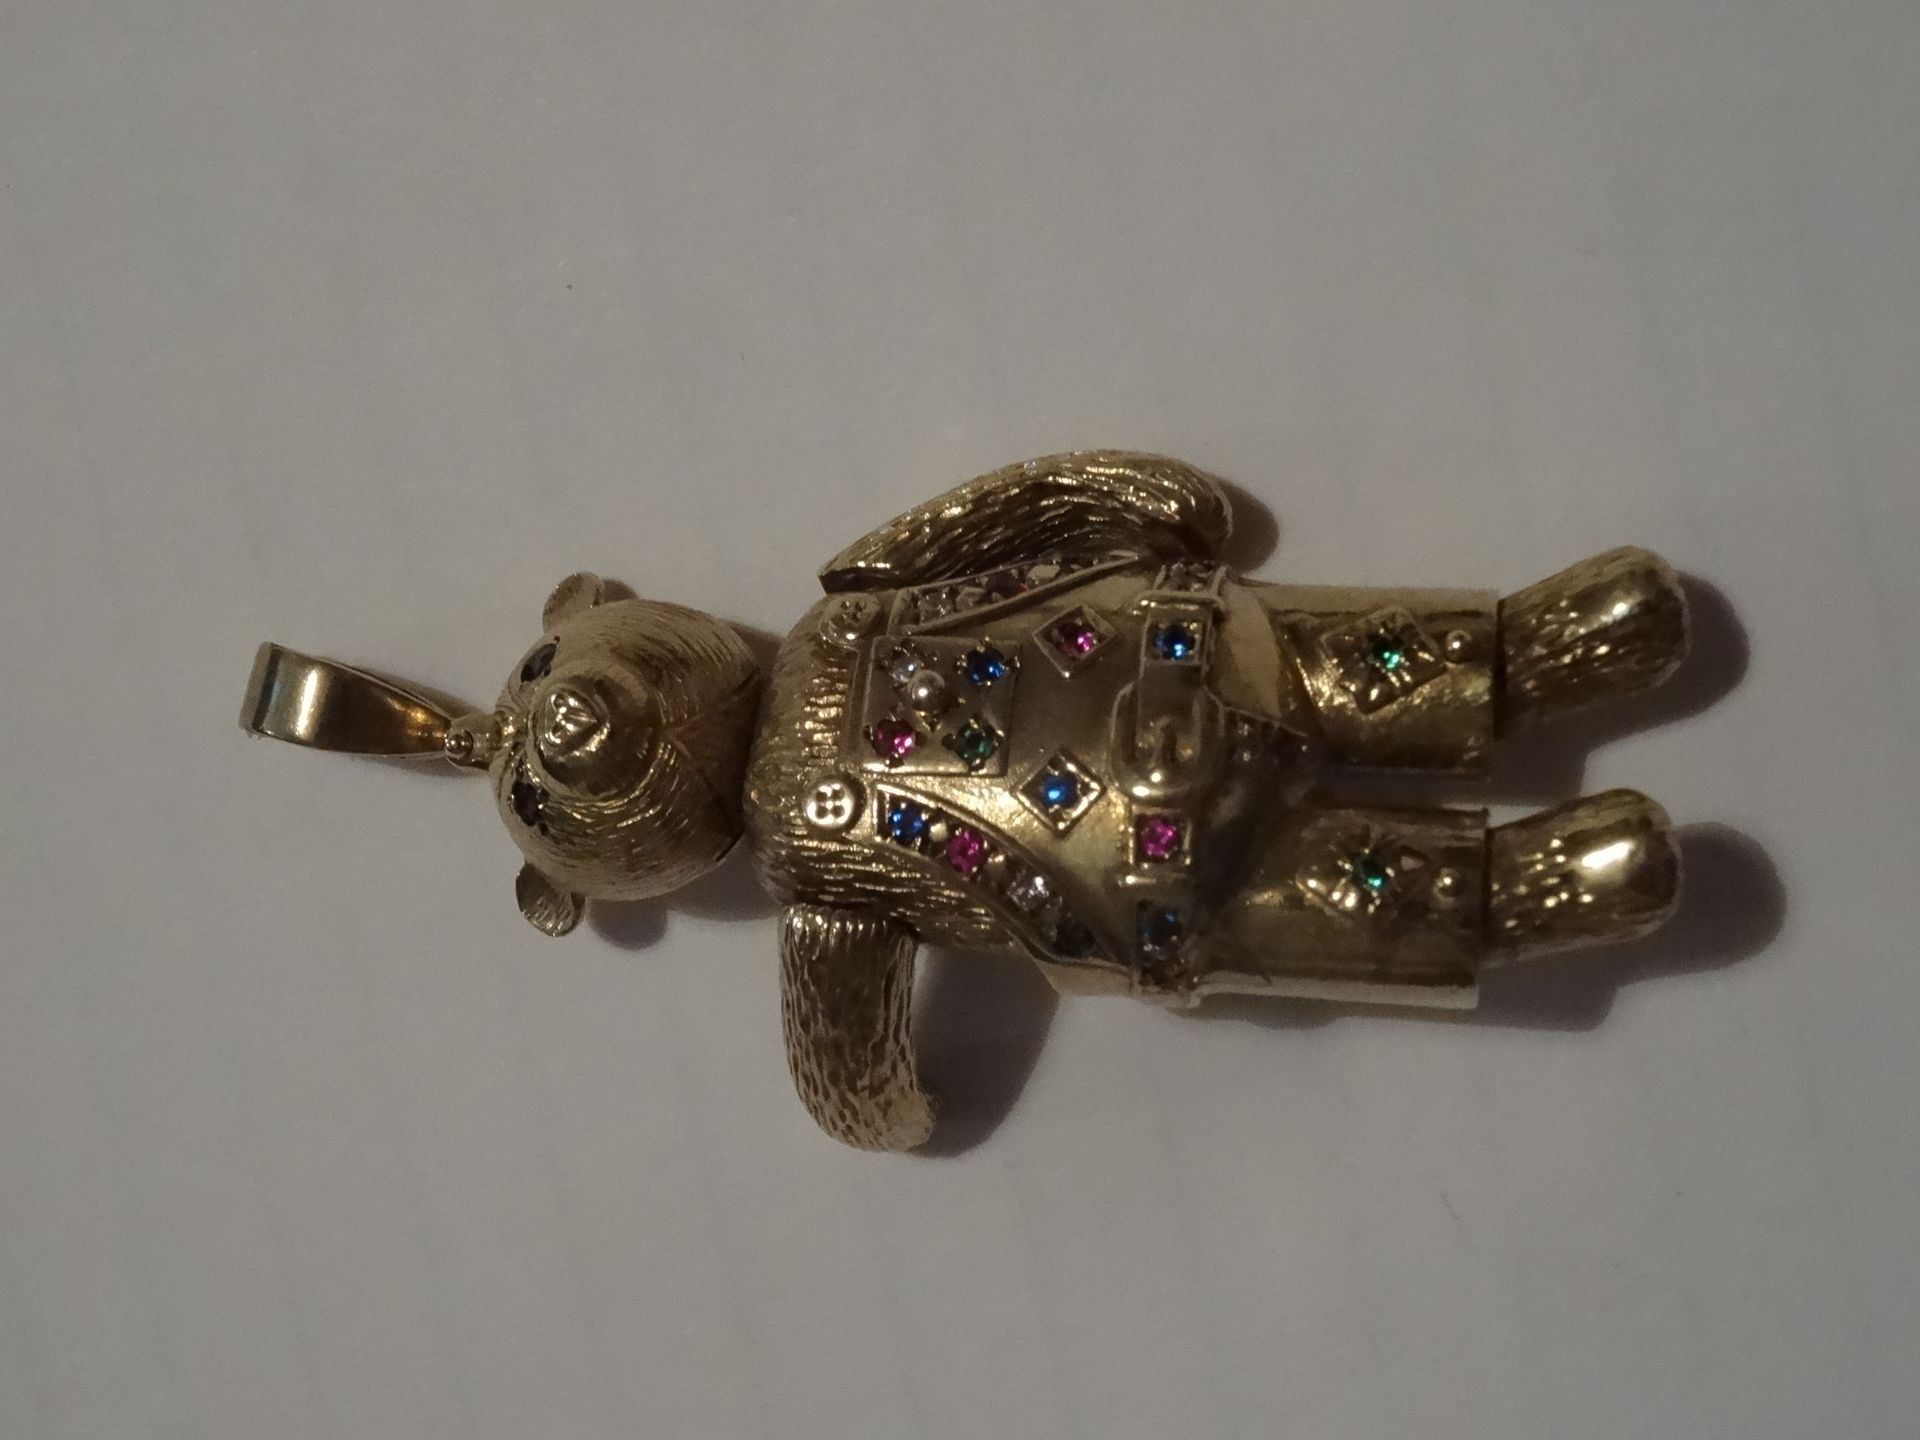 9 Carat Yellow Gold Moveable Teddy Bear Pendant. Set with 26 Stones in green, clear, red and blue.